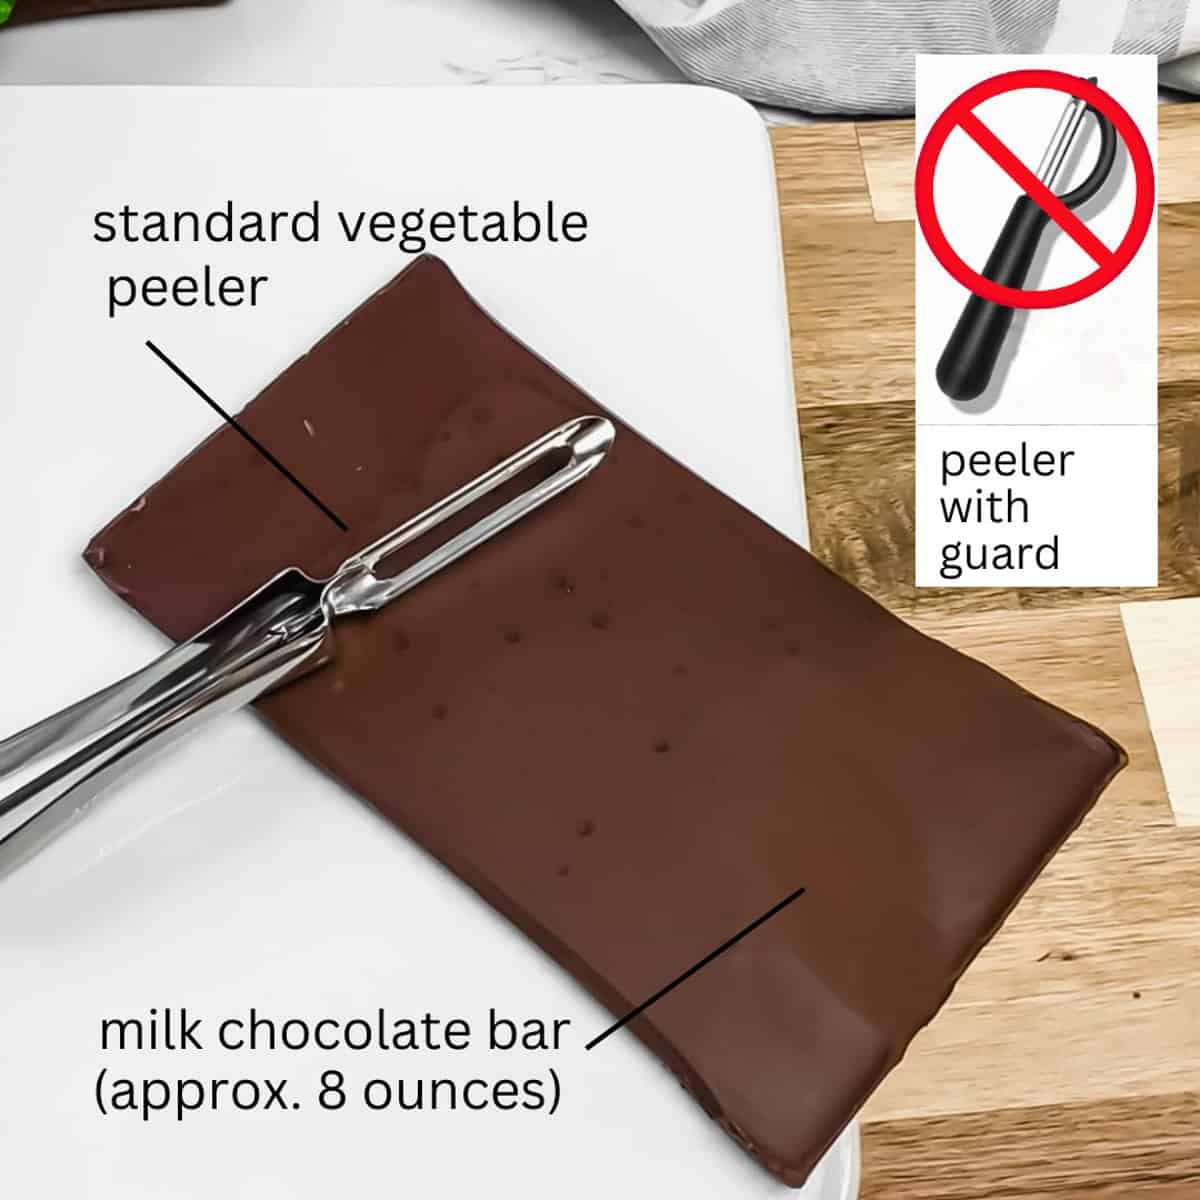 large milk chocolate bar and vegetable peeler without a guard.